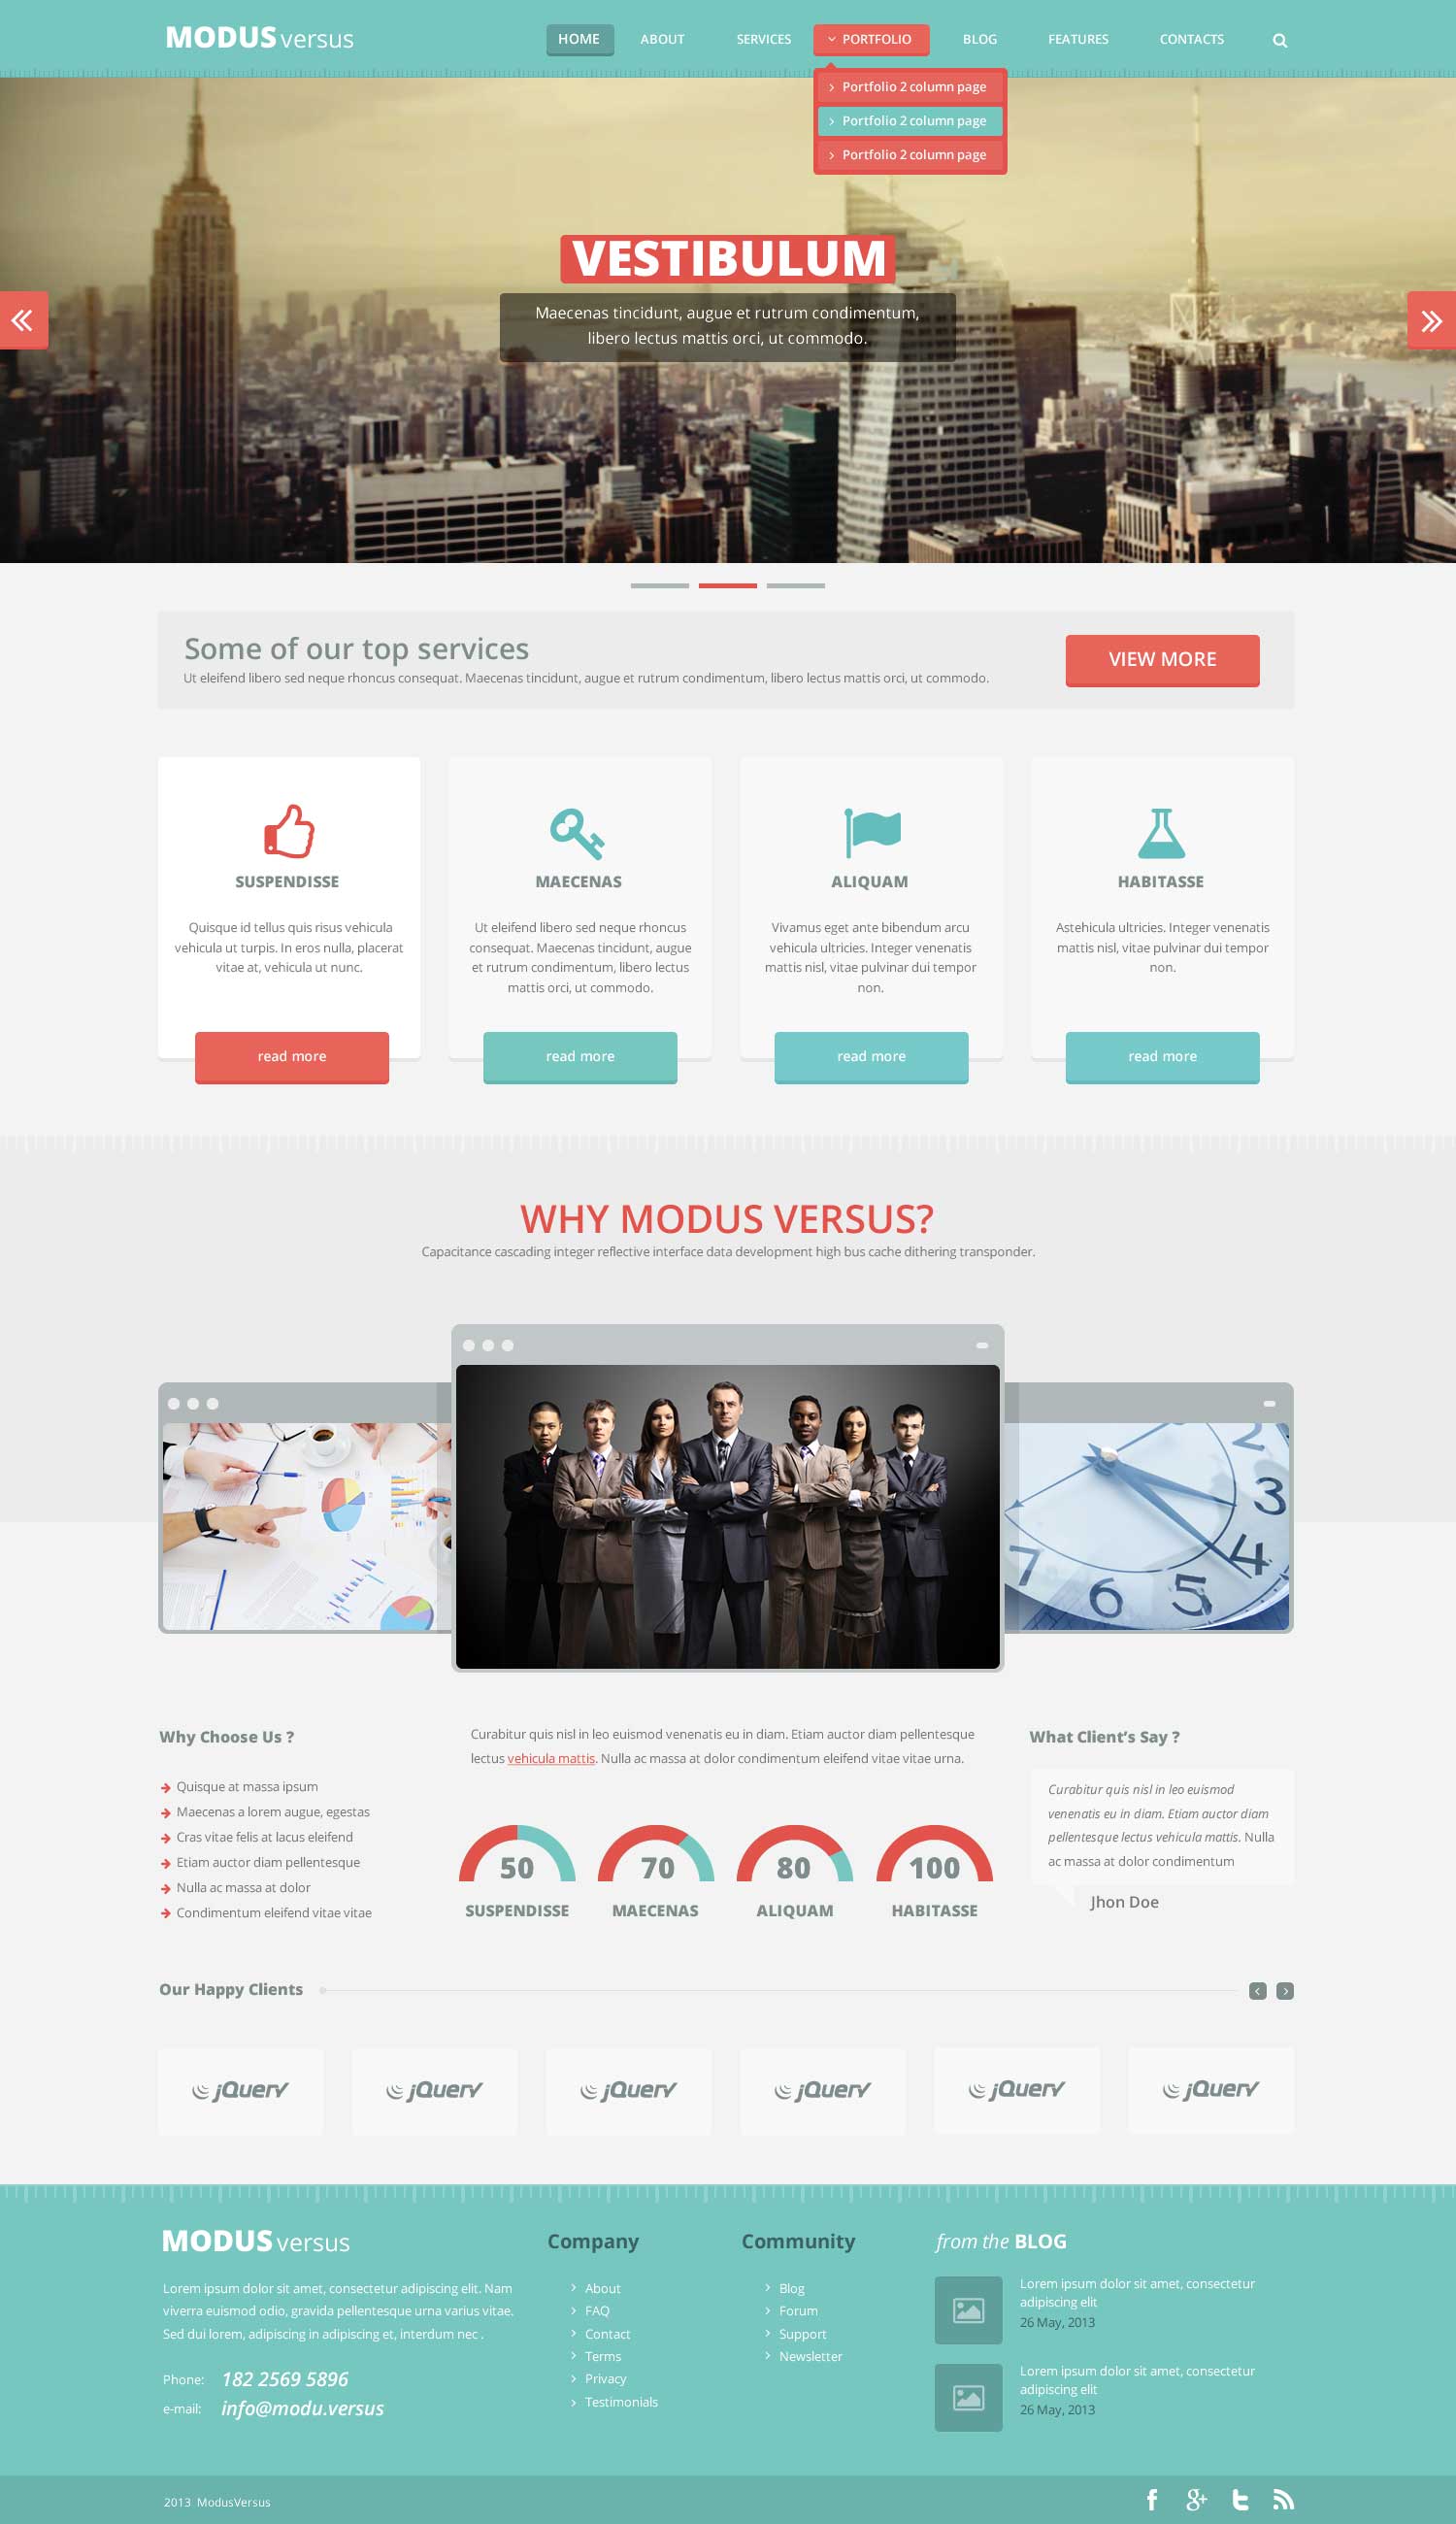 modus_versus_homepage_turquoise_red